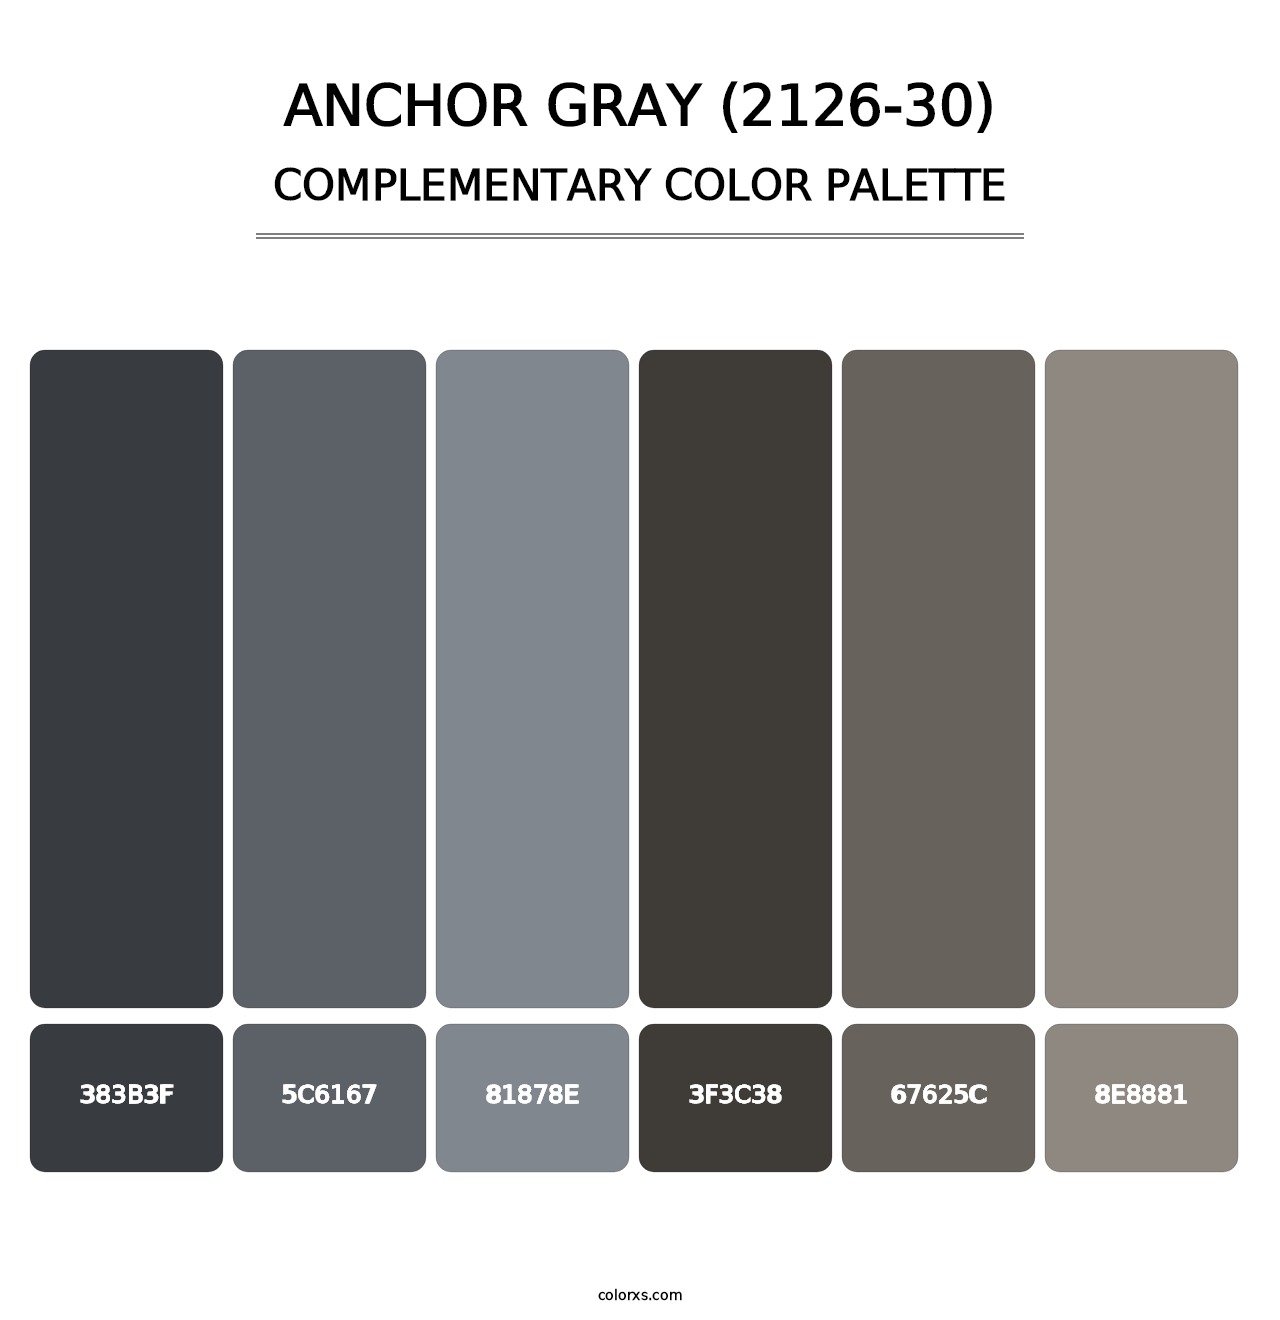 Anchor Gray (2126-30) - Complementary Color Palette